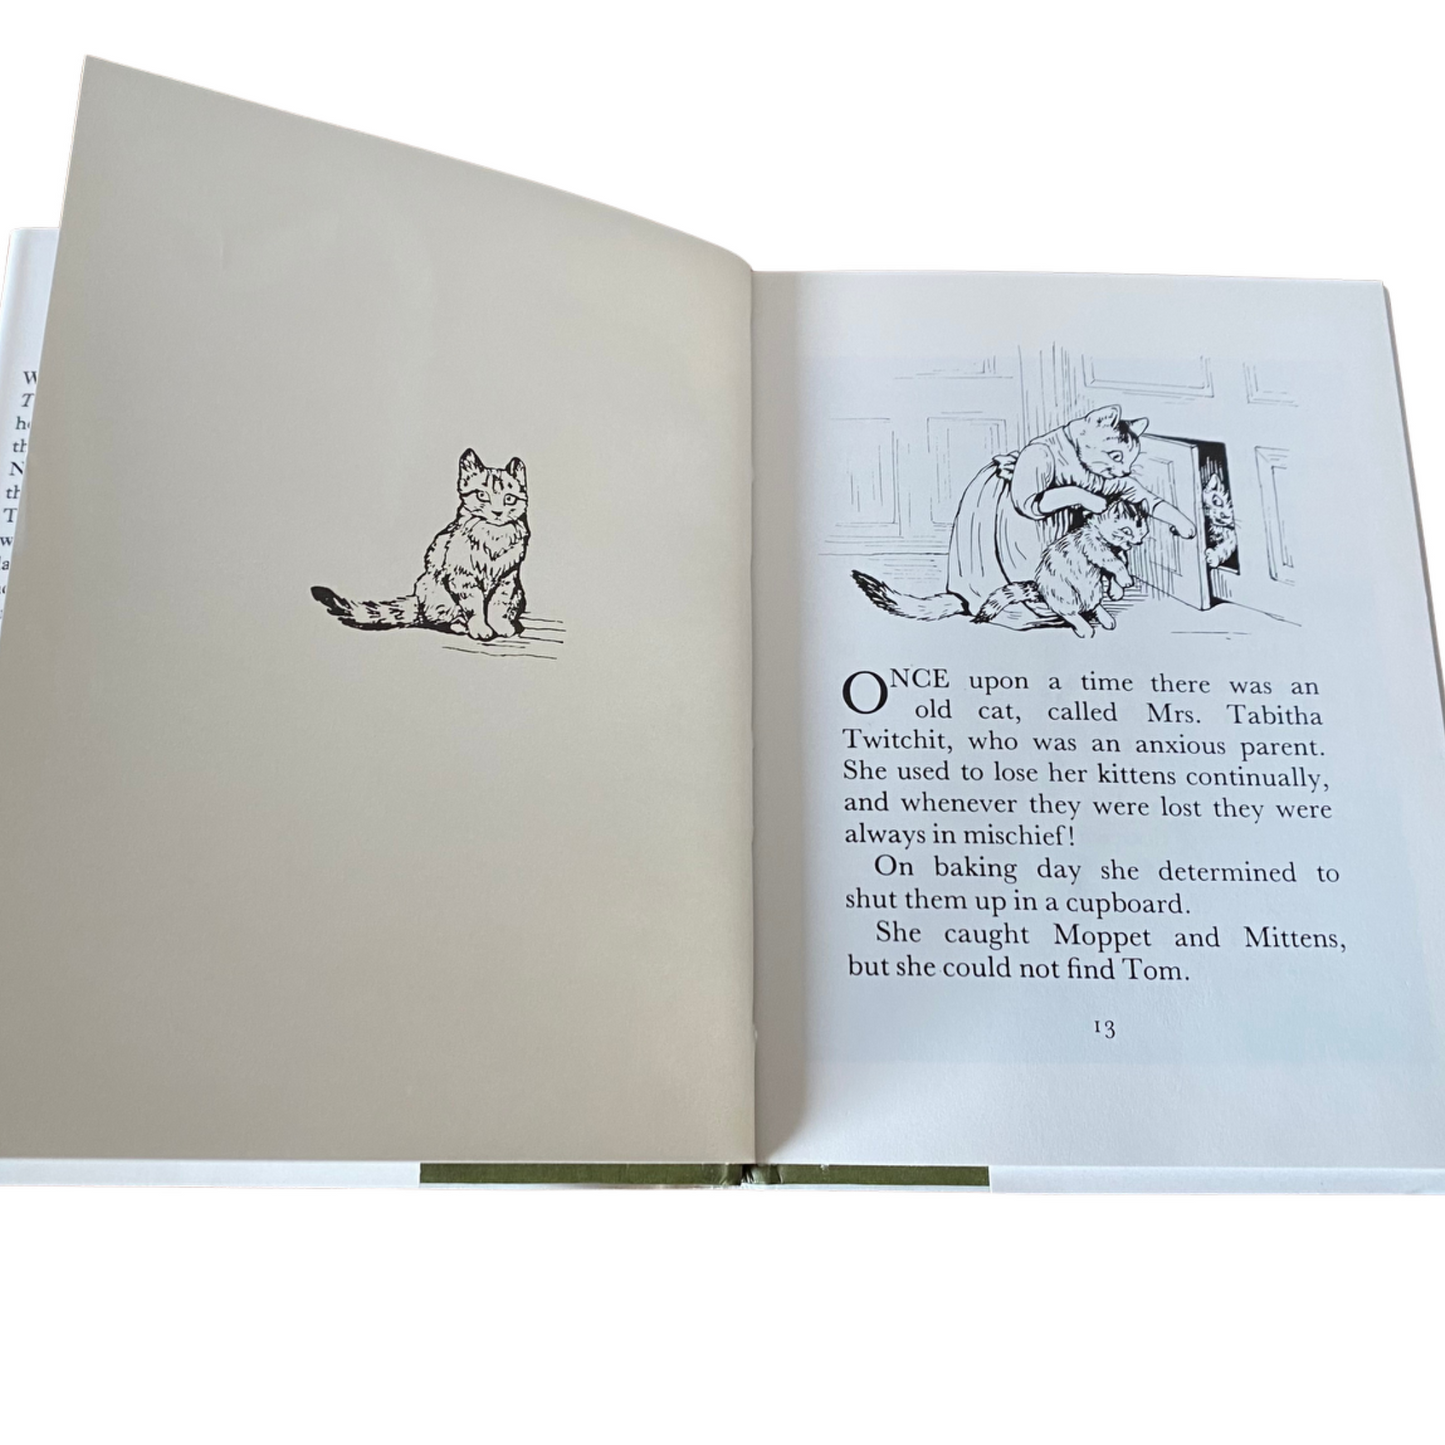 The Tale of Samuel Whiskers or The Roly - Poly Pudding. Vintage Beatrix Potter book, 1987 edition.